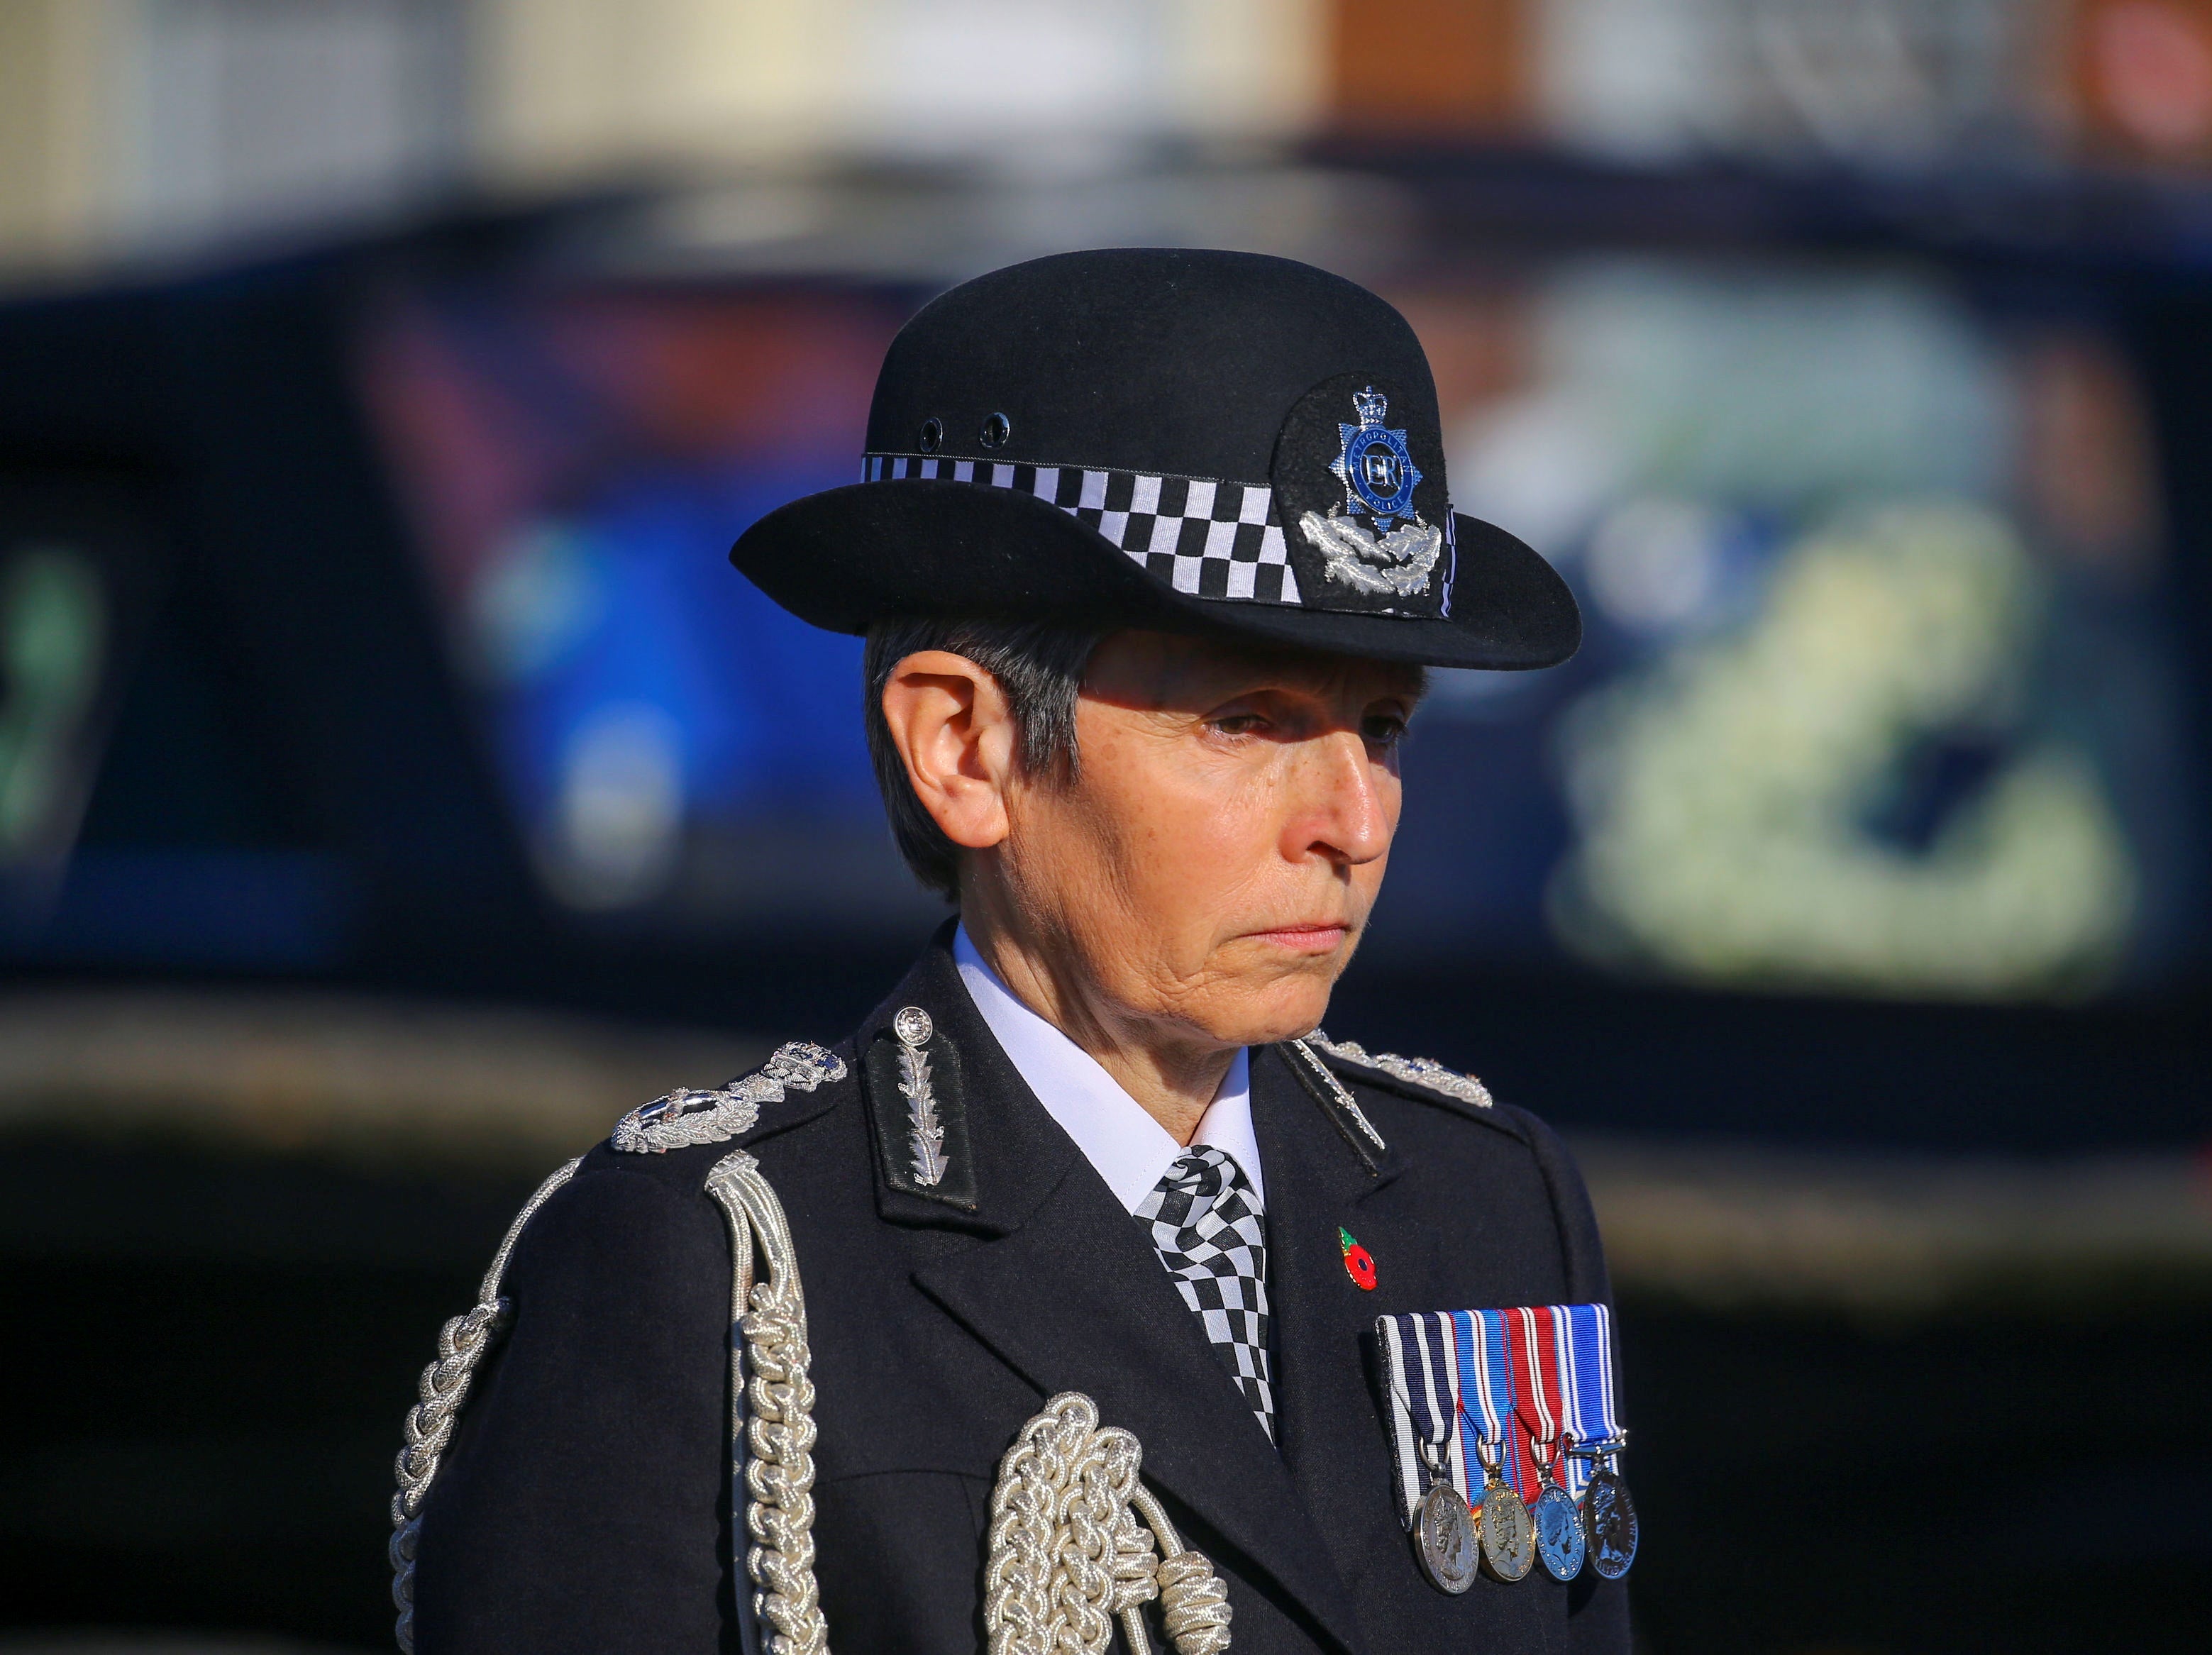 Metropolitan Police Commissioner Dame Cressida Dick has said coronavirus rule-breakers are “increasingly likely” to face fines in England’s third lockdown